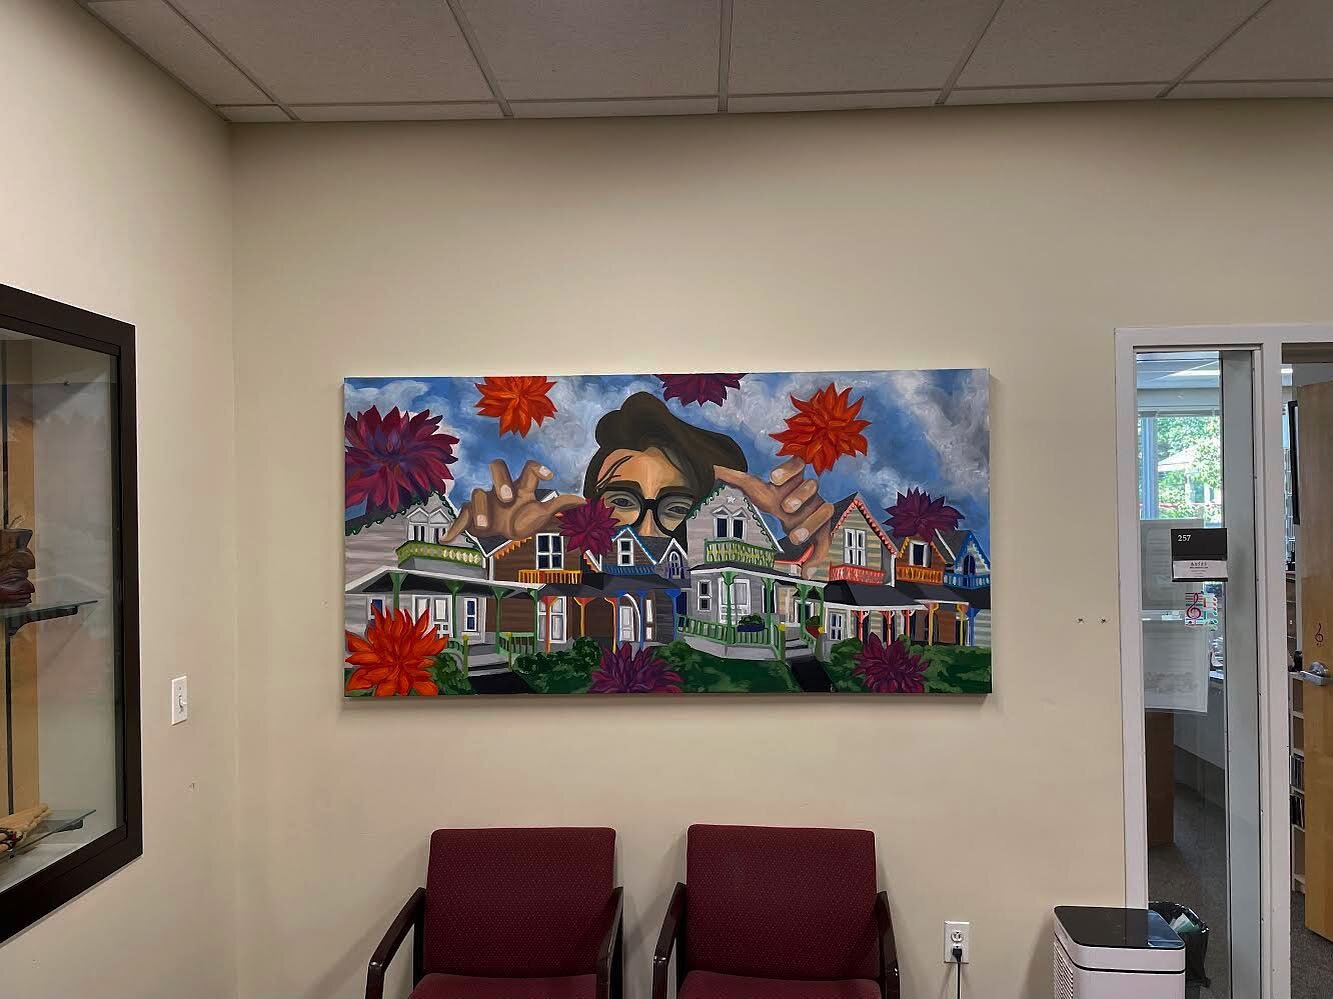 &ldquo;welcome to the jungle&rdquo; hung at my old elementary/middle school @dedhamcountrydayschool 🥳🌟 so grateful to see my work in action with the public it makes me so happy 😁🥰
.
.
.
#oilpainting #painting #artshow #artonview #bostonartist #bo